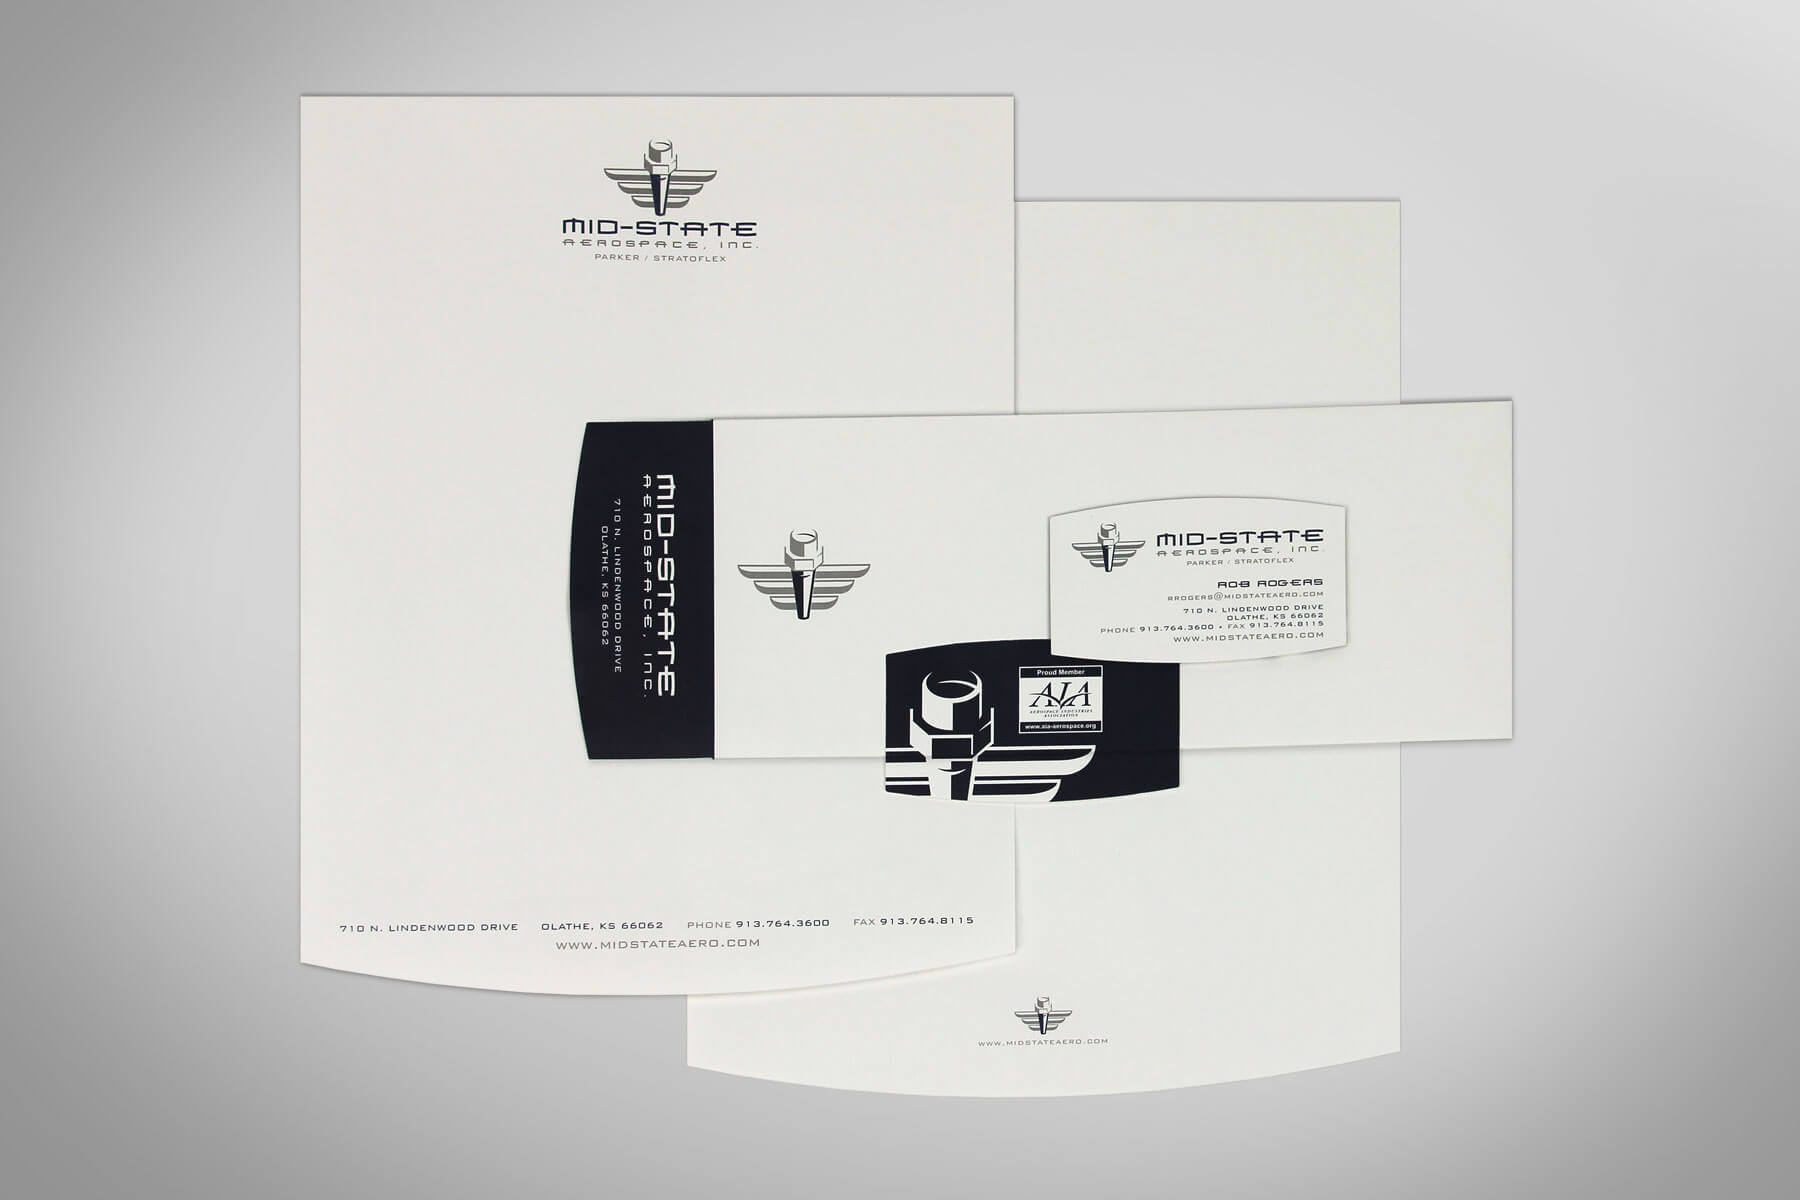 midstate aerospace collateral 1